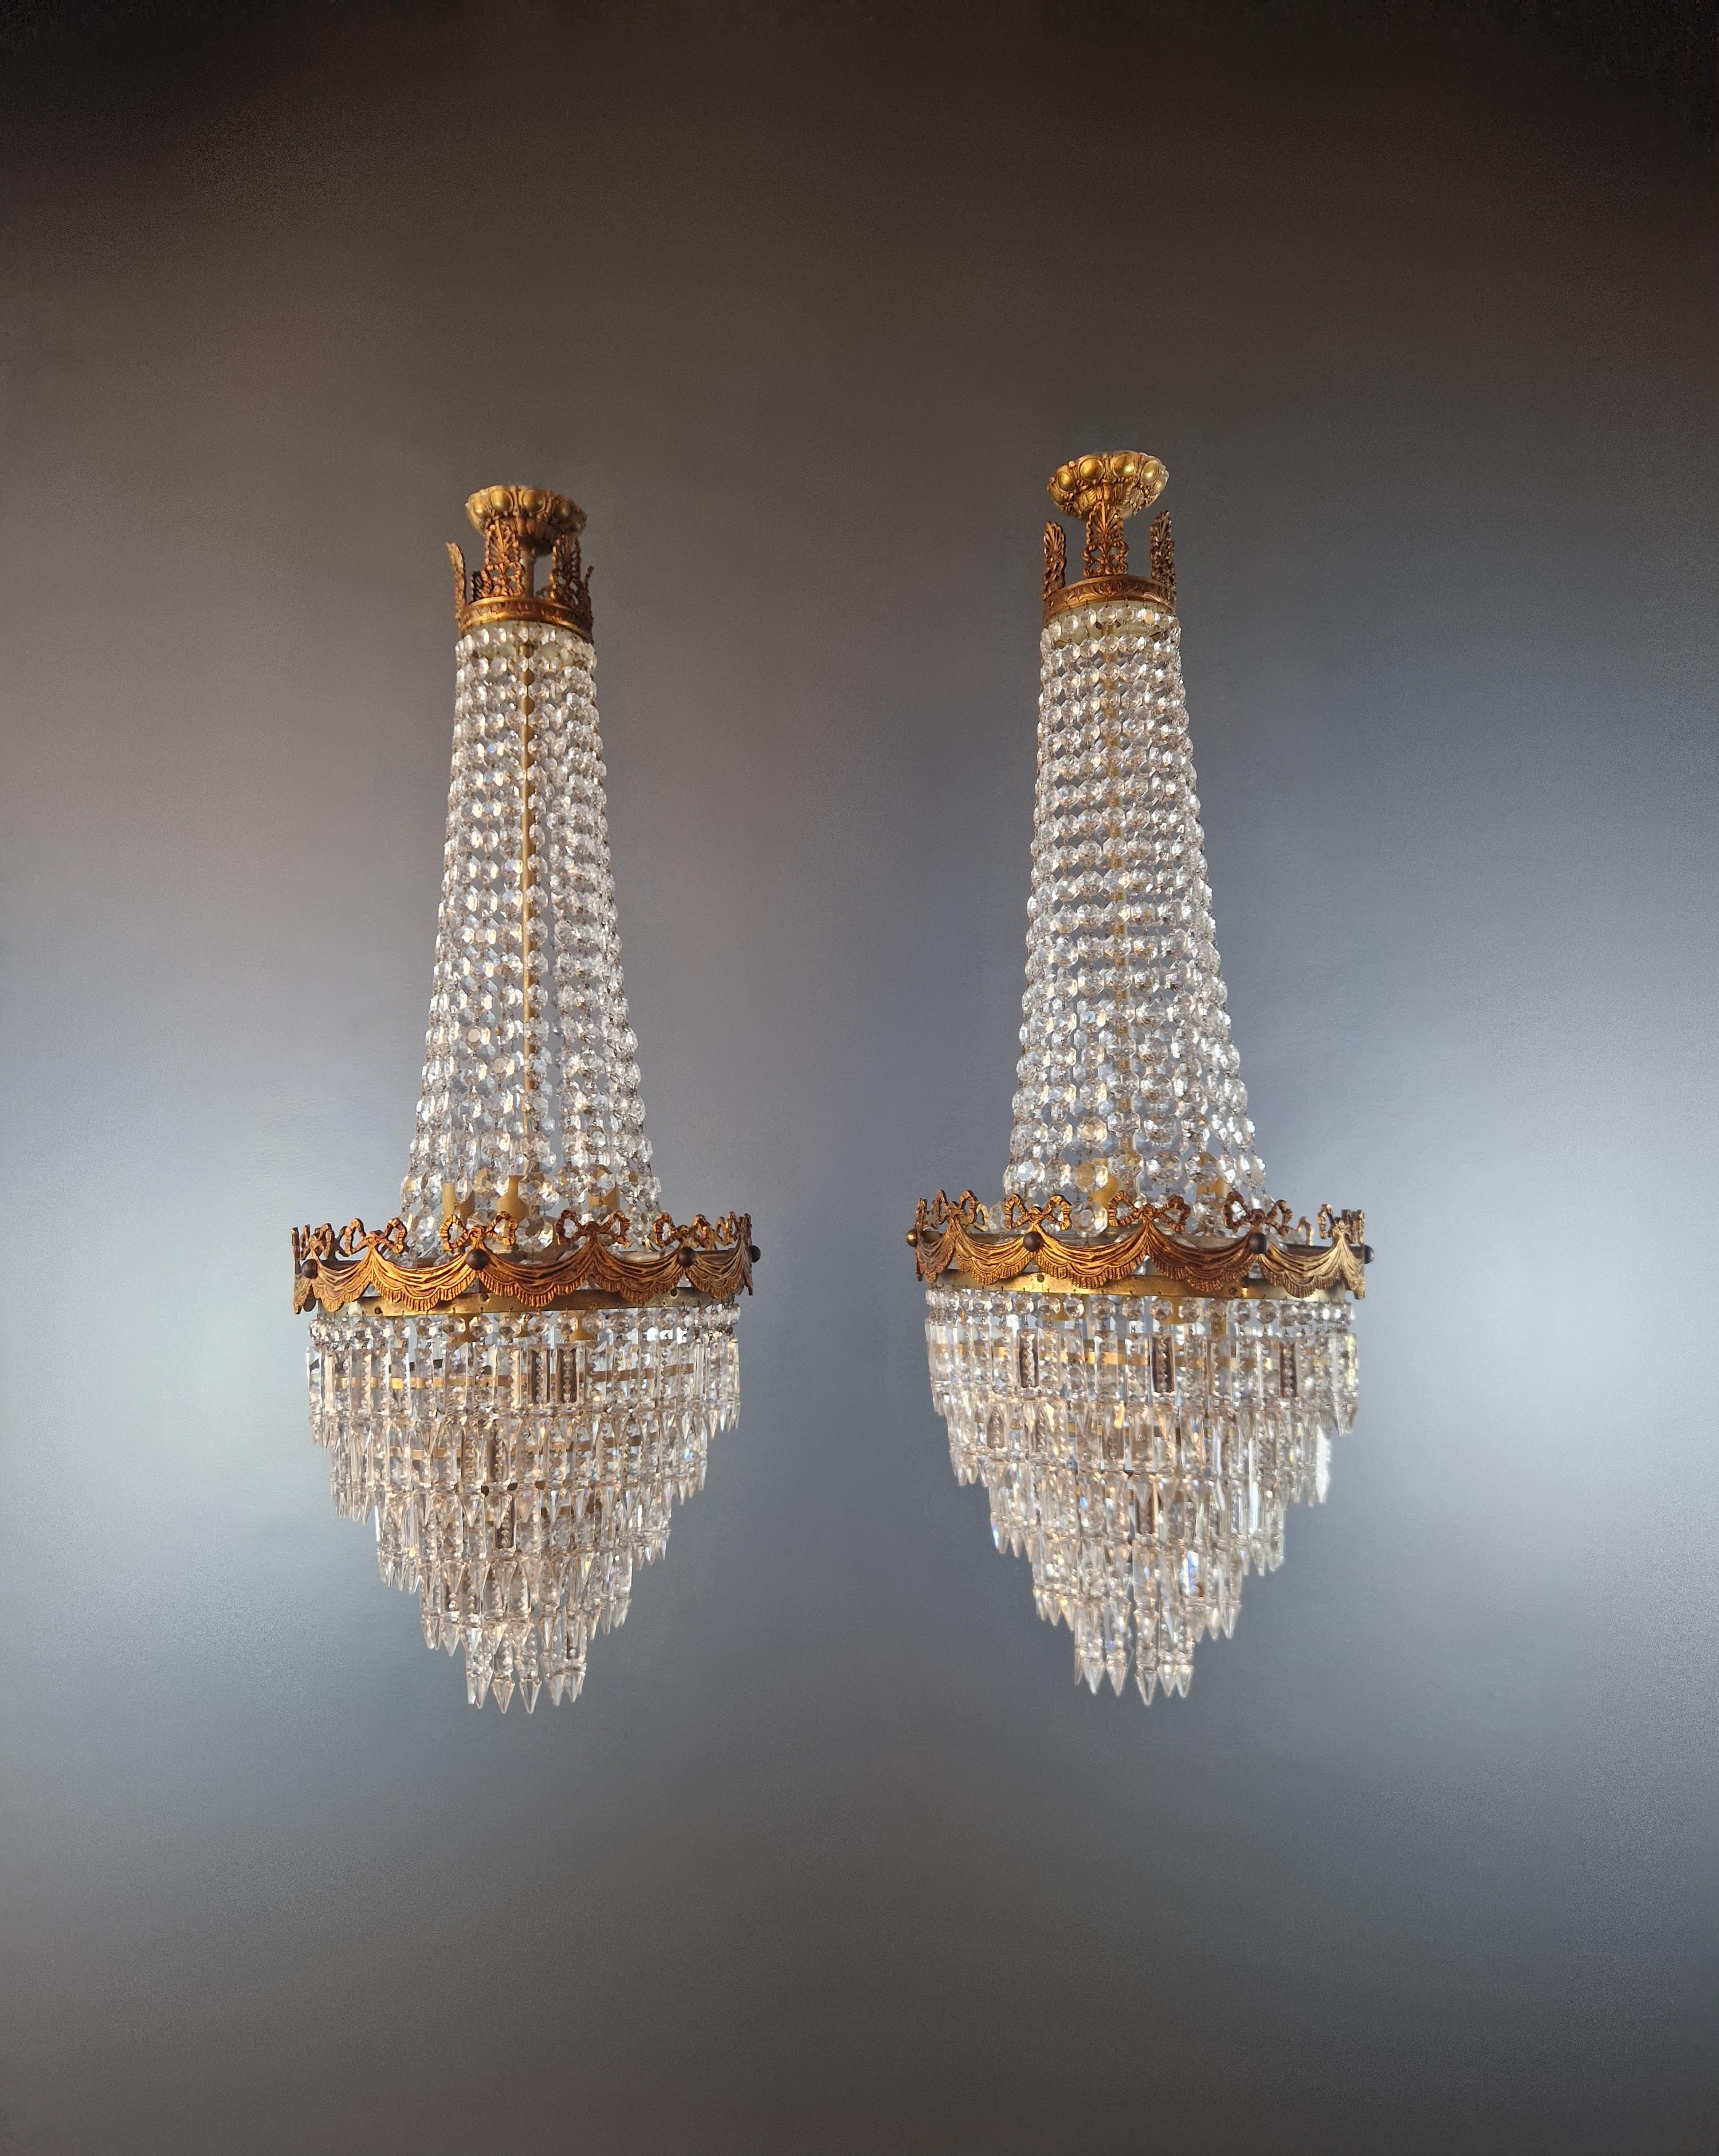 Immerse yourself in the magic of yesterday with these exquisite hand-linked crystal chandeliers, a blend of elegance and Art Nouveau opulence. Carefully restored in Berlin, these chandeliers harmoniously combine vintage charm with modern